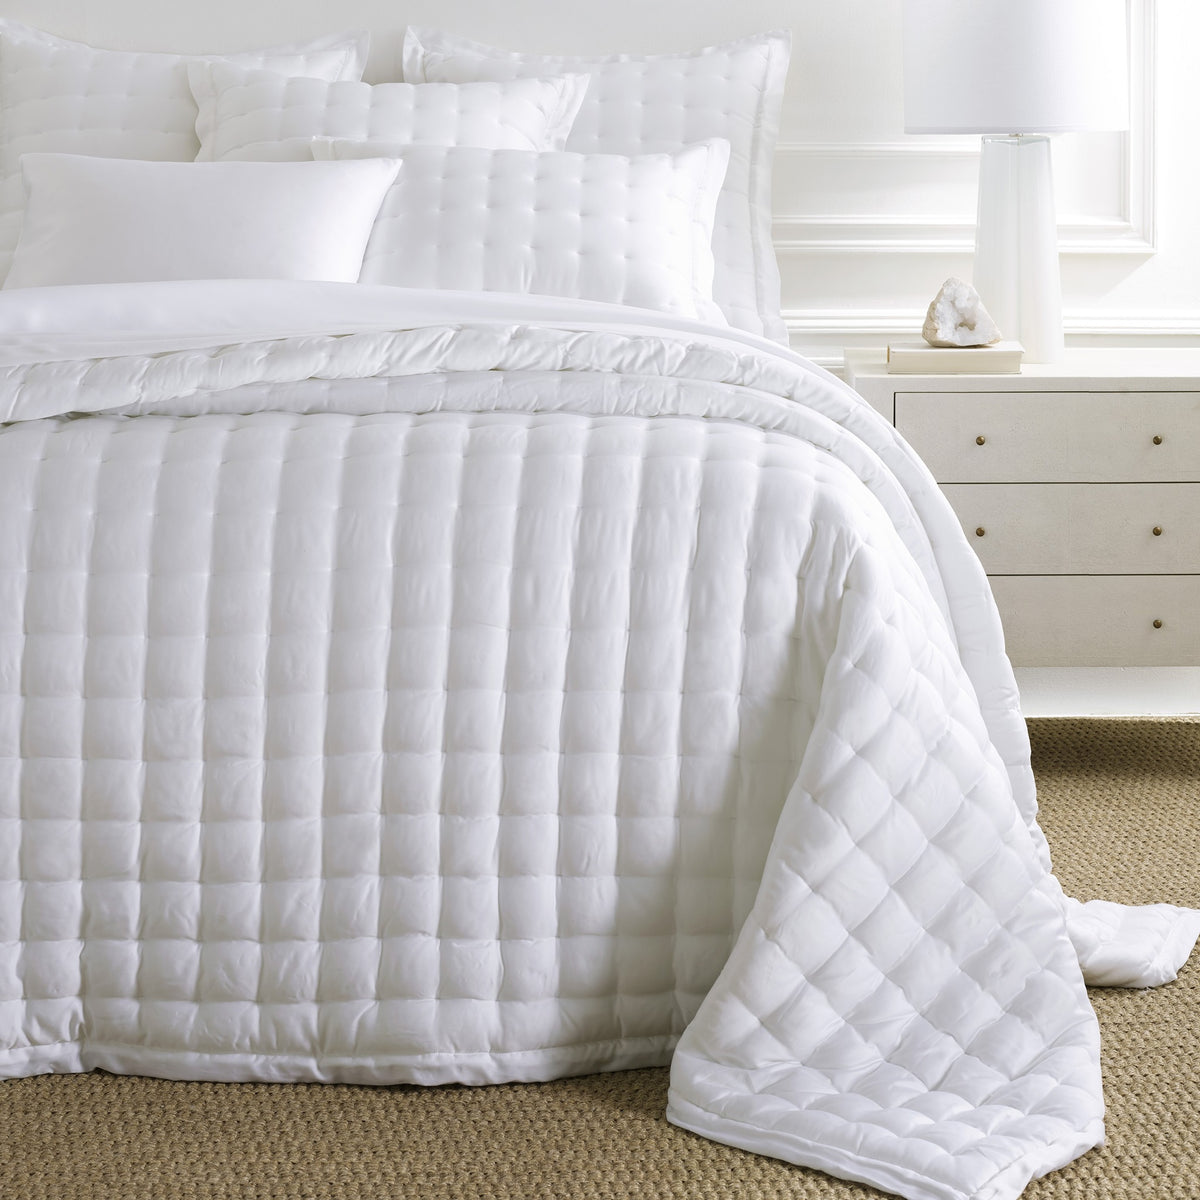 Bed Dressed in Pine Cone Hill Silken Solid Puff in Color White